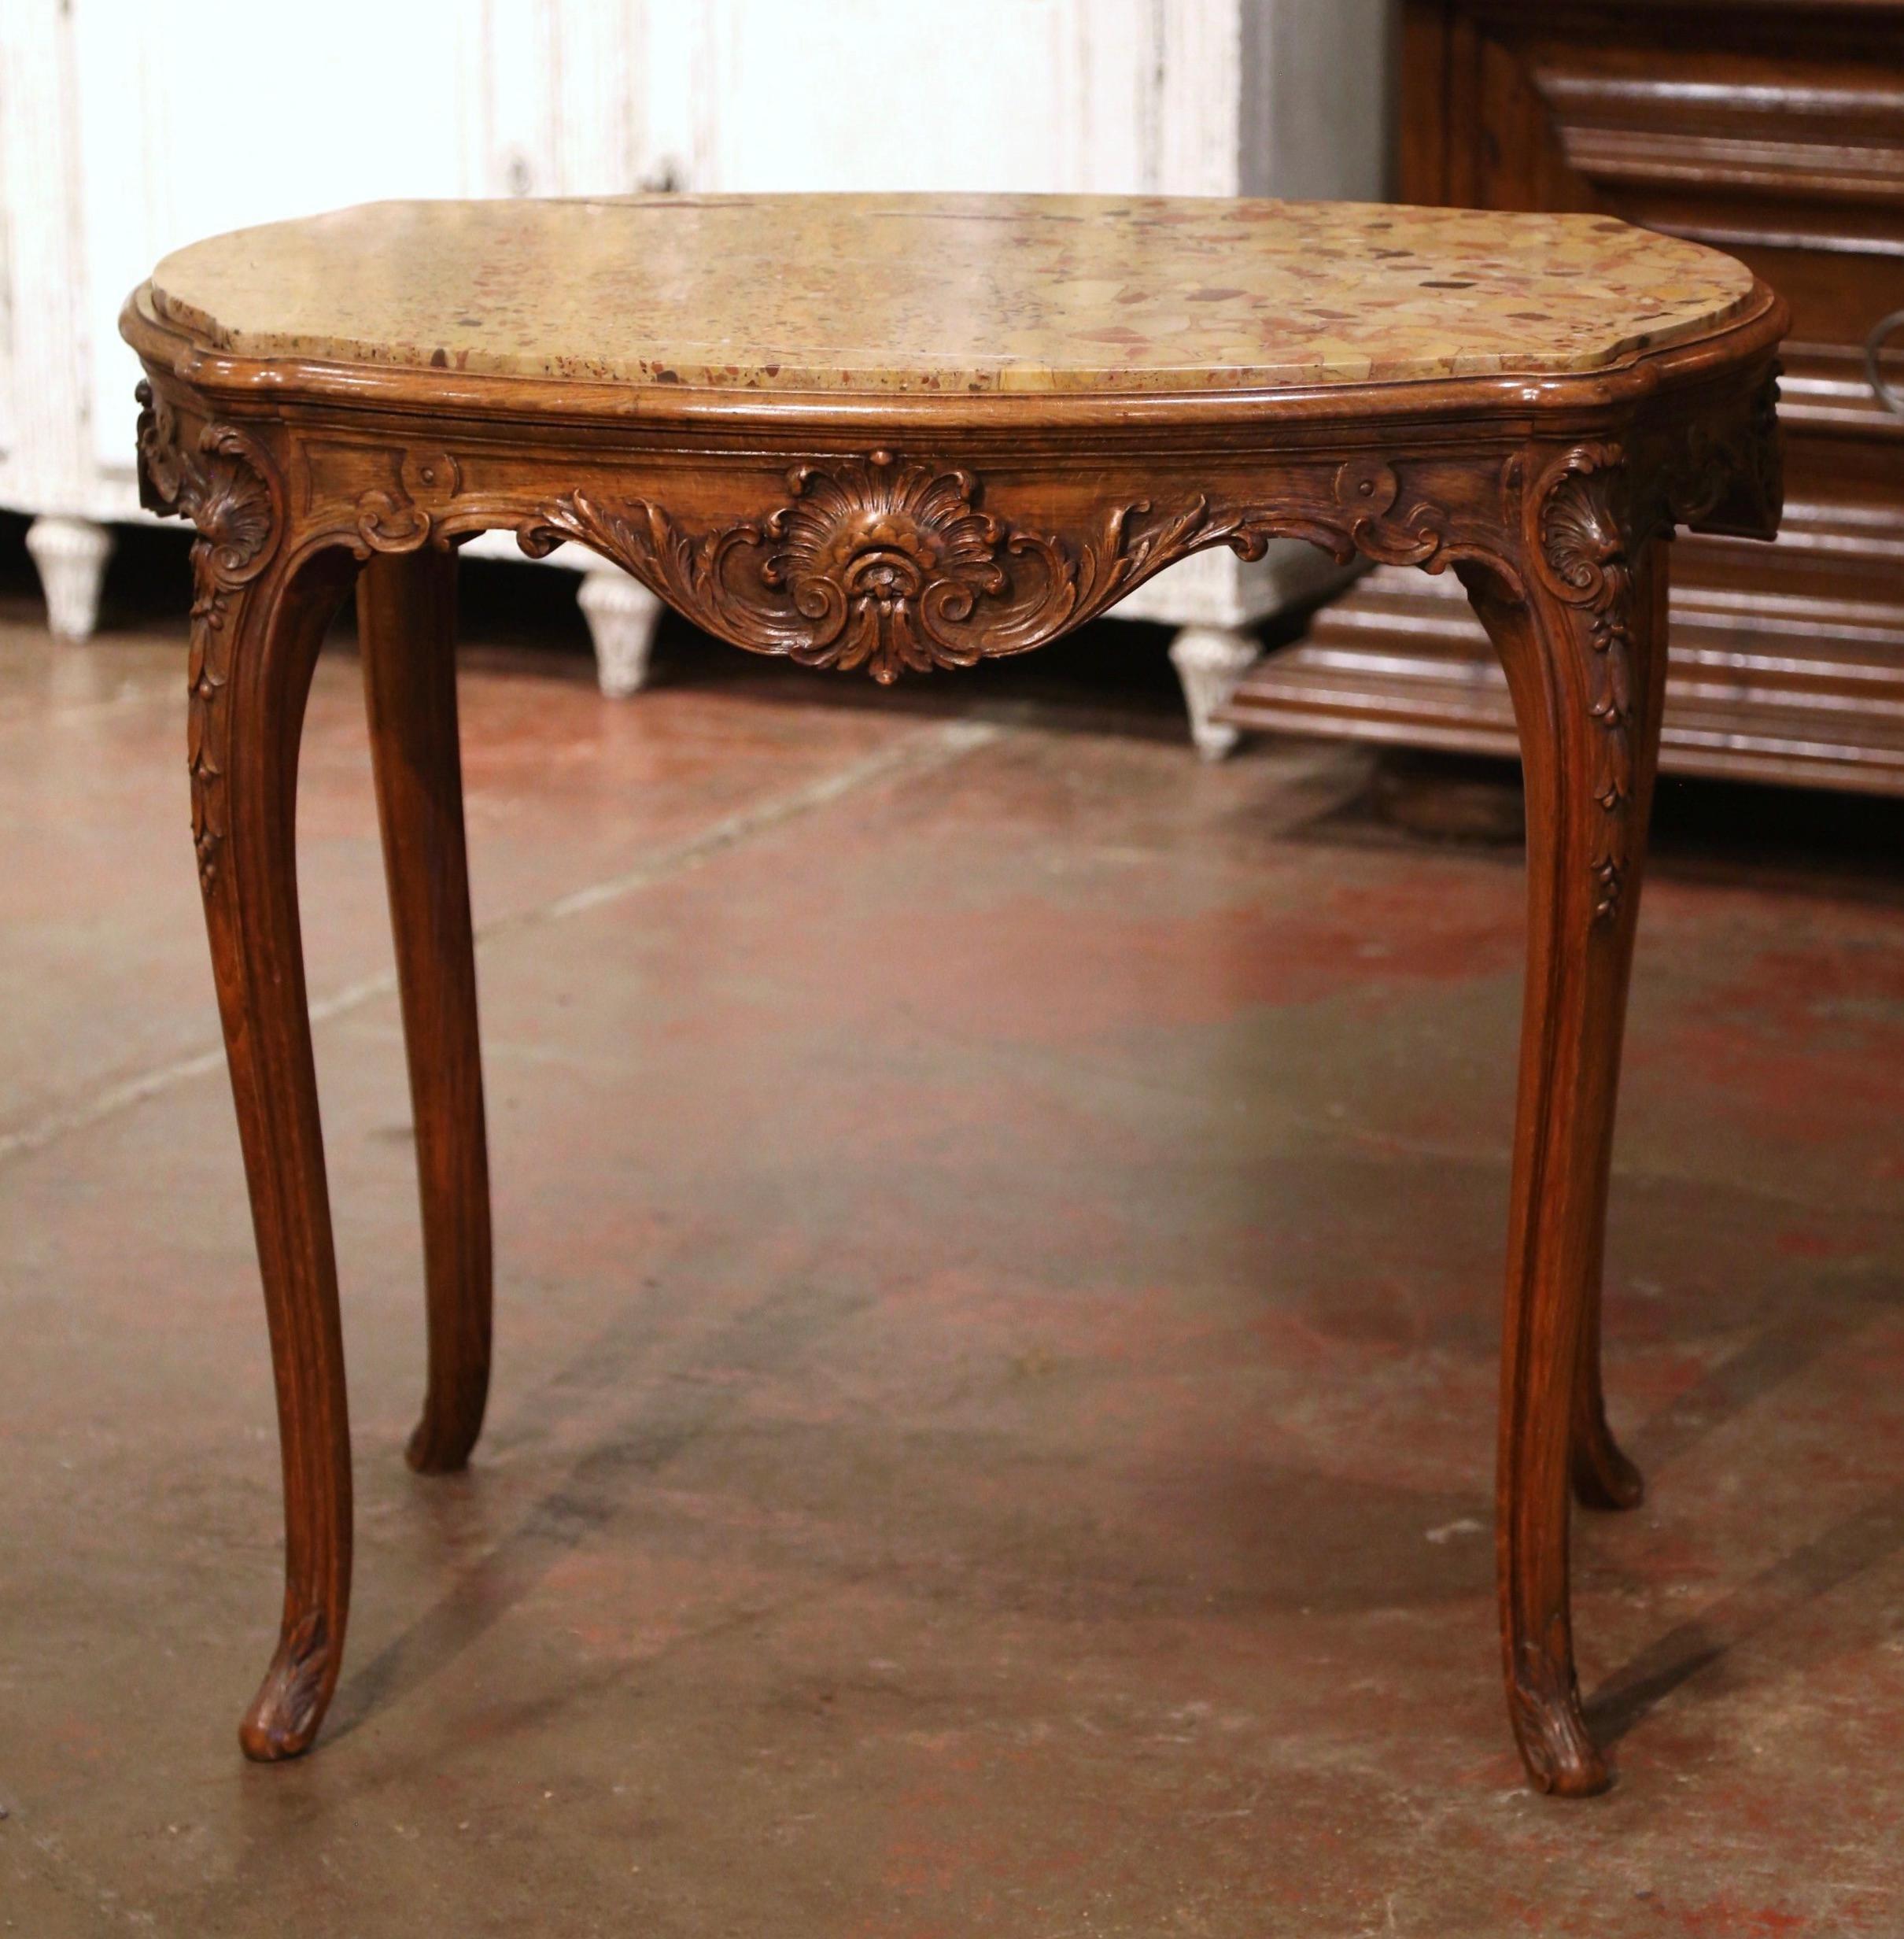 Crafted in France, circa 1880 and oval in shape, the antique table stands on cabriole legs ending with acanthus leaves at the feet. The elegant end table is decorated with delicate hand carved shell and foliage motifs around the scalloped and bombe